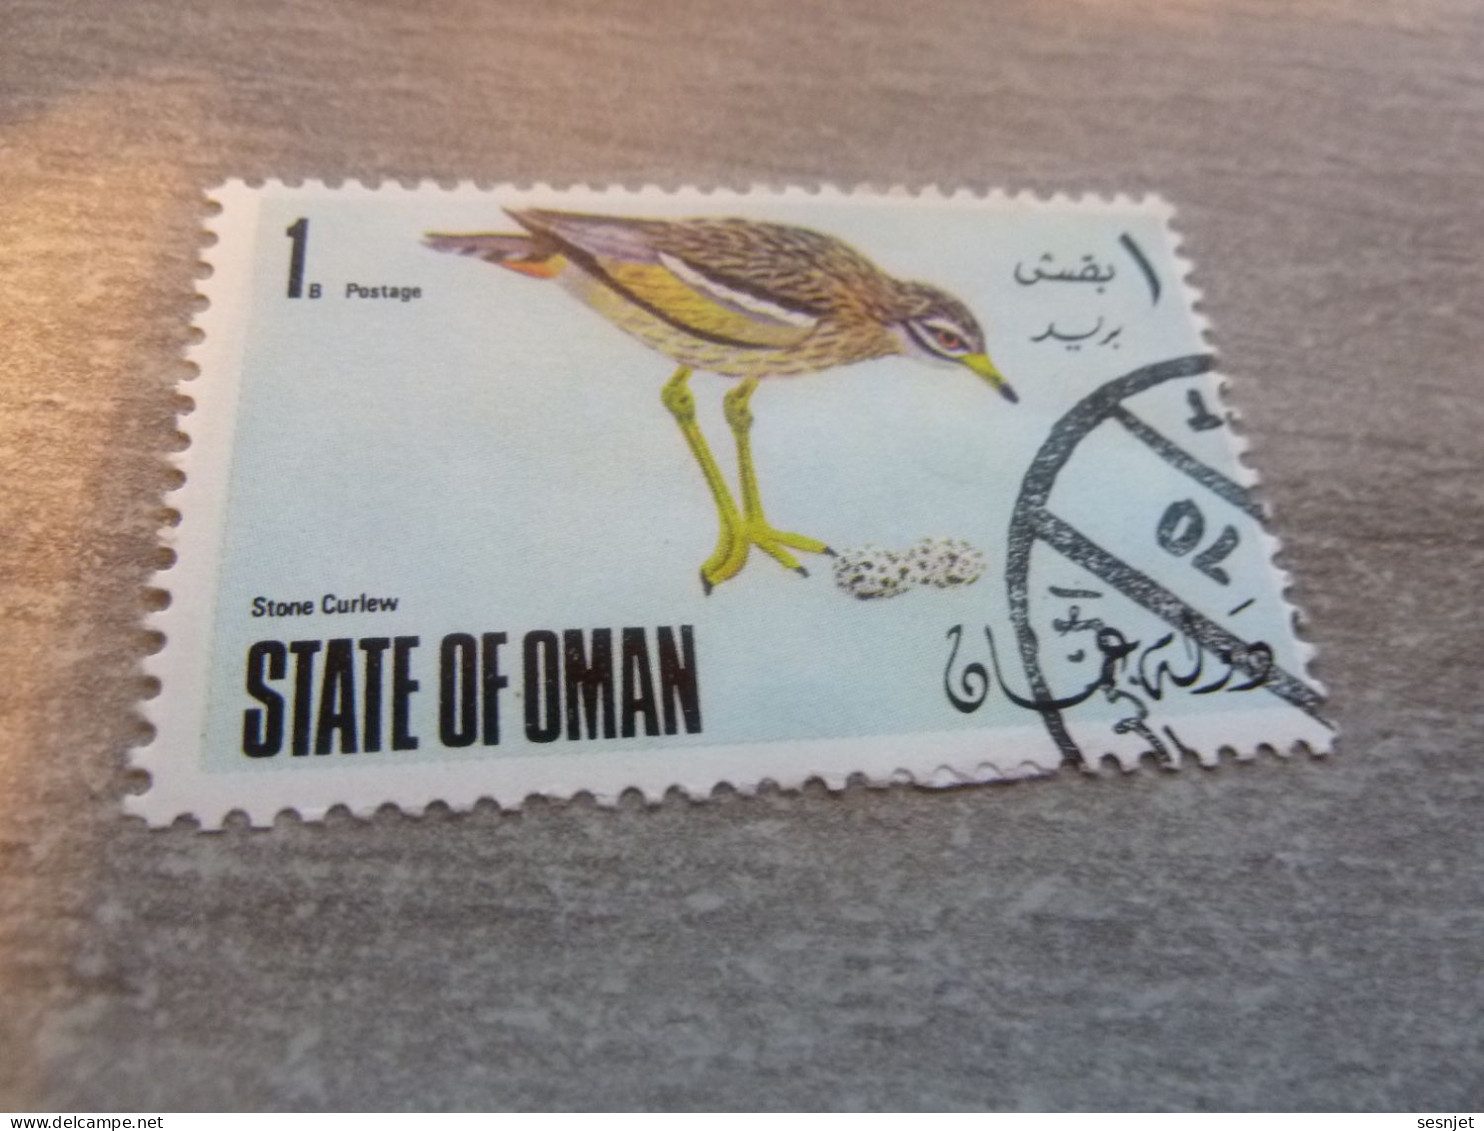 State Of Oman - Stone Curlew -  Val 1 B - Postage - Polychrome - Oblitéré - Année 1970 - - Moineaux